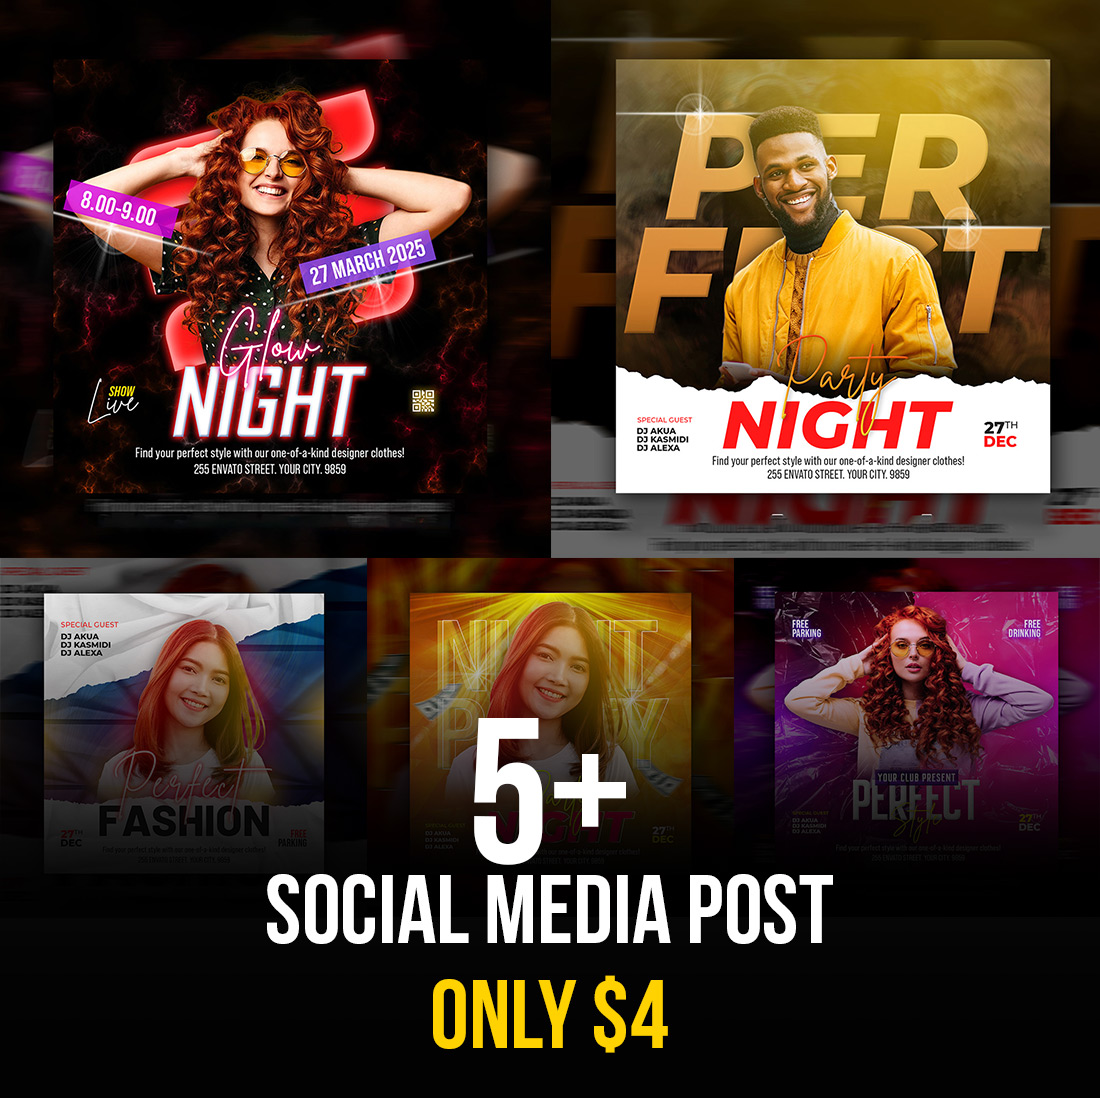 5+Food and restaurant social media Banner post templates- only $4 cover image.